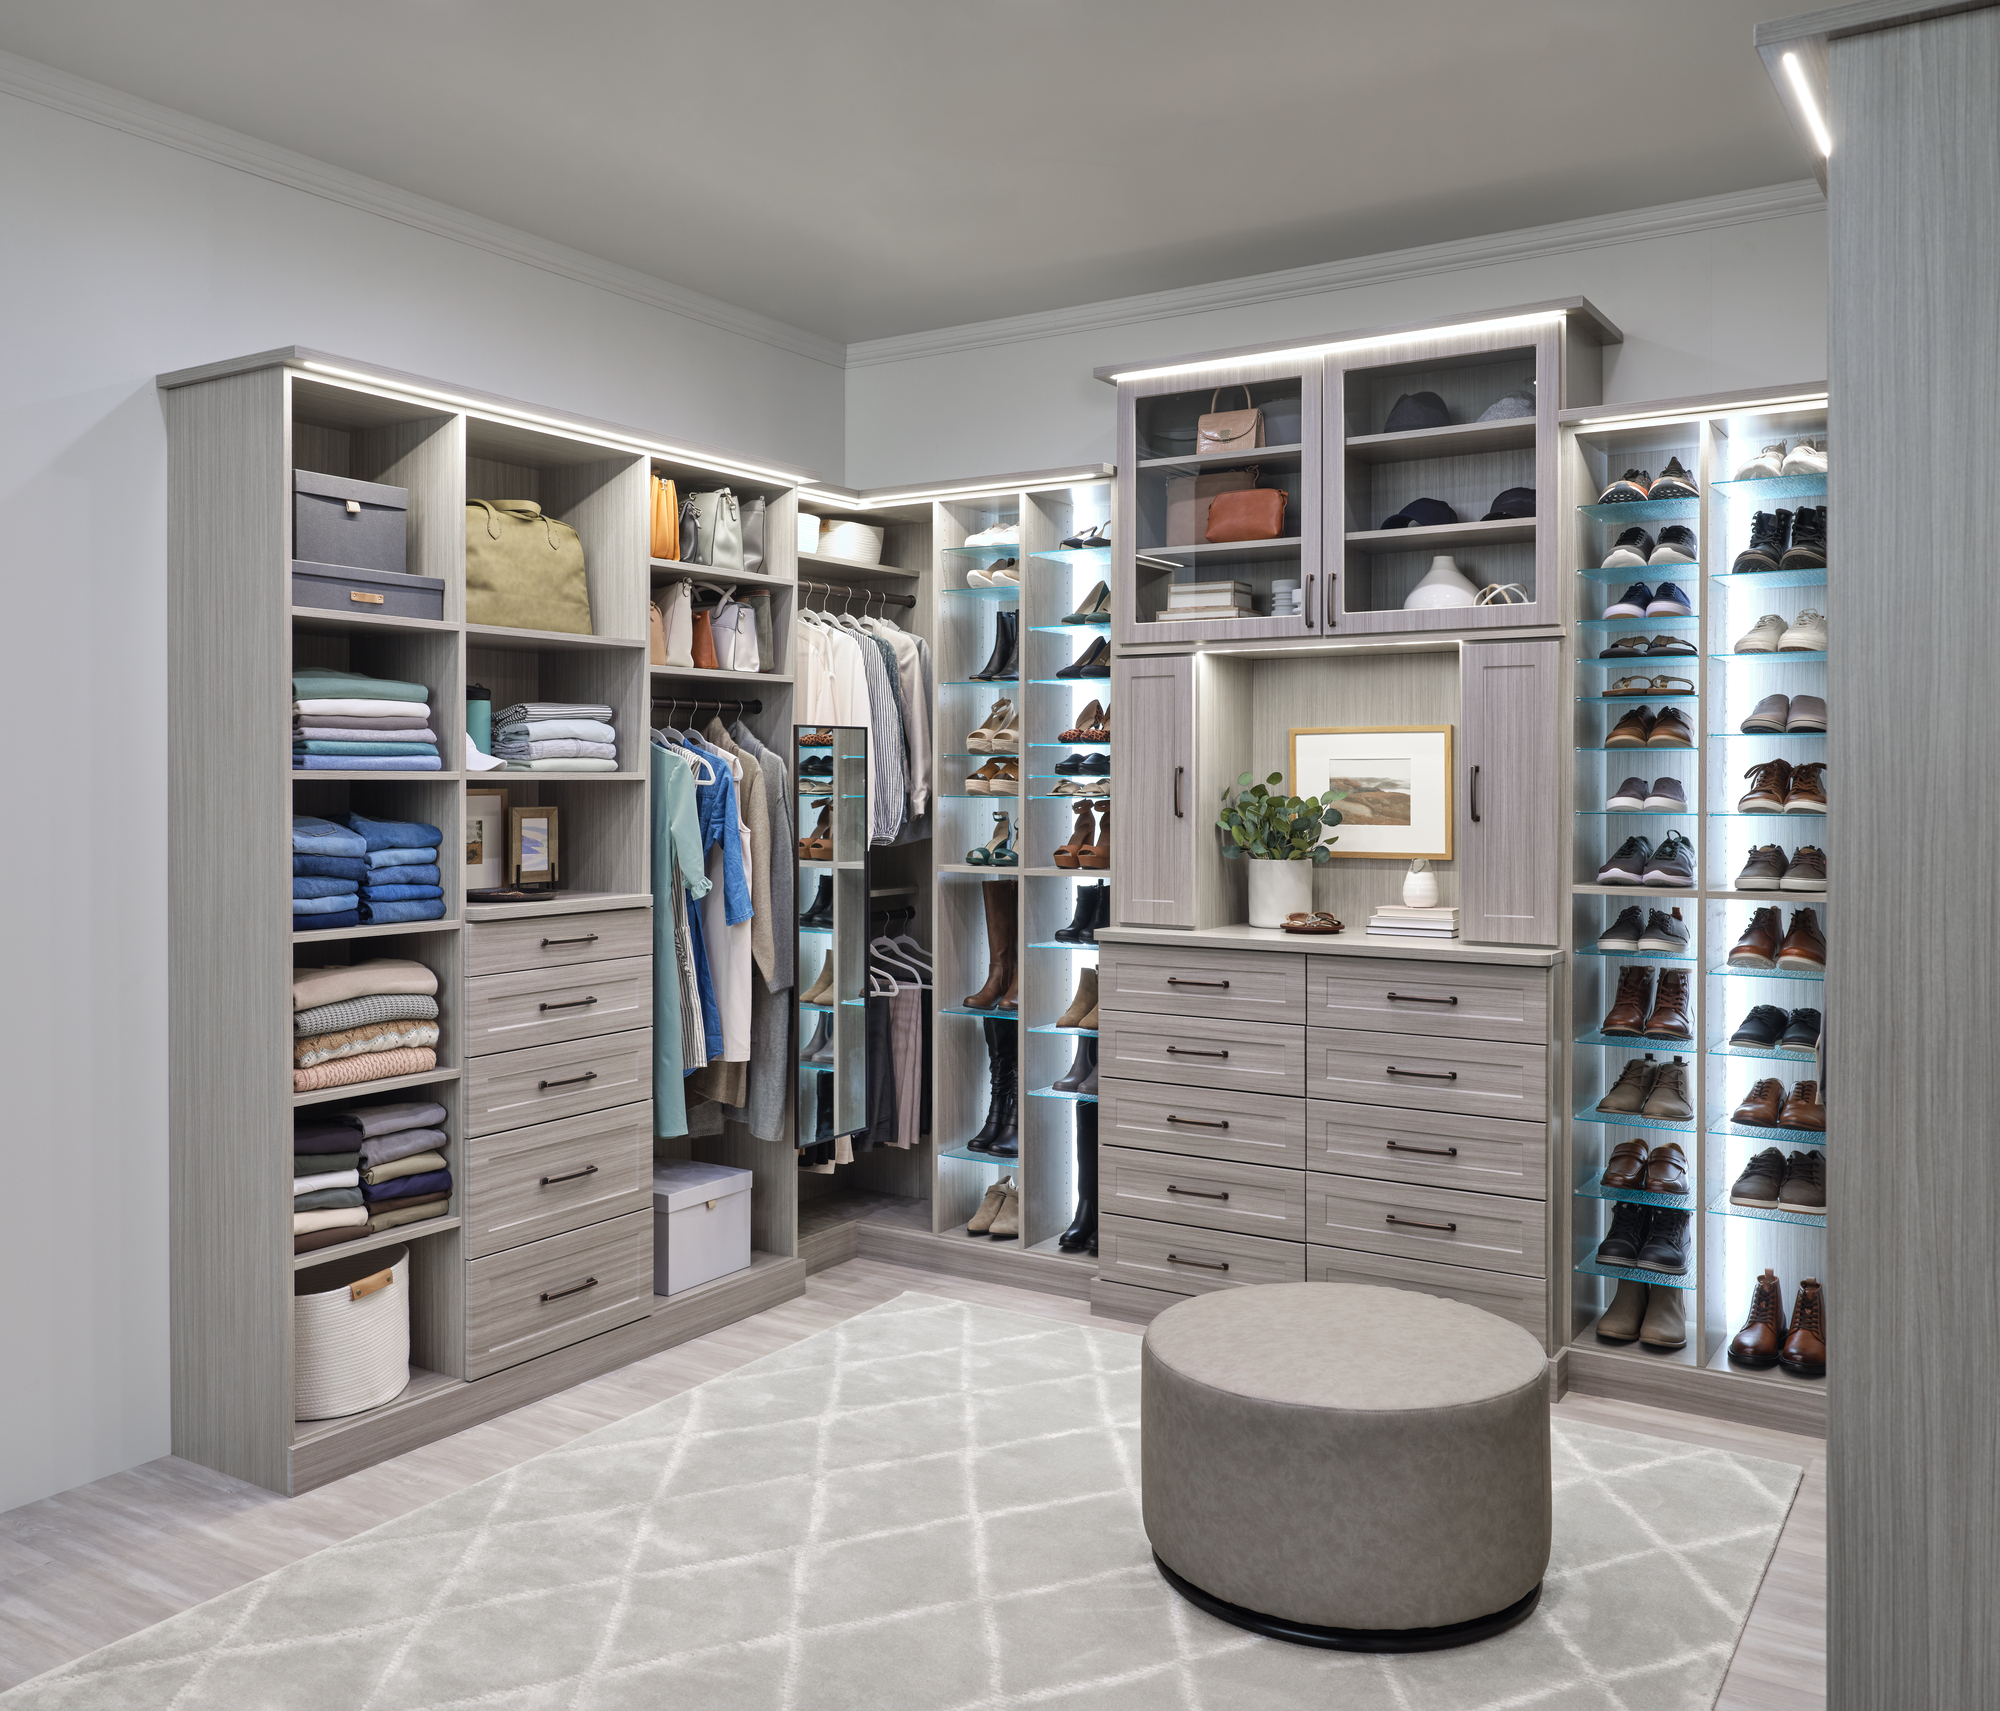 Large custom closet with custom lighting, shelving and adjustable shoe shelves in timber grey